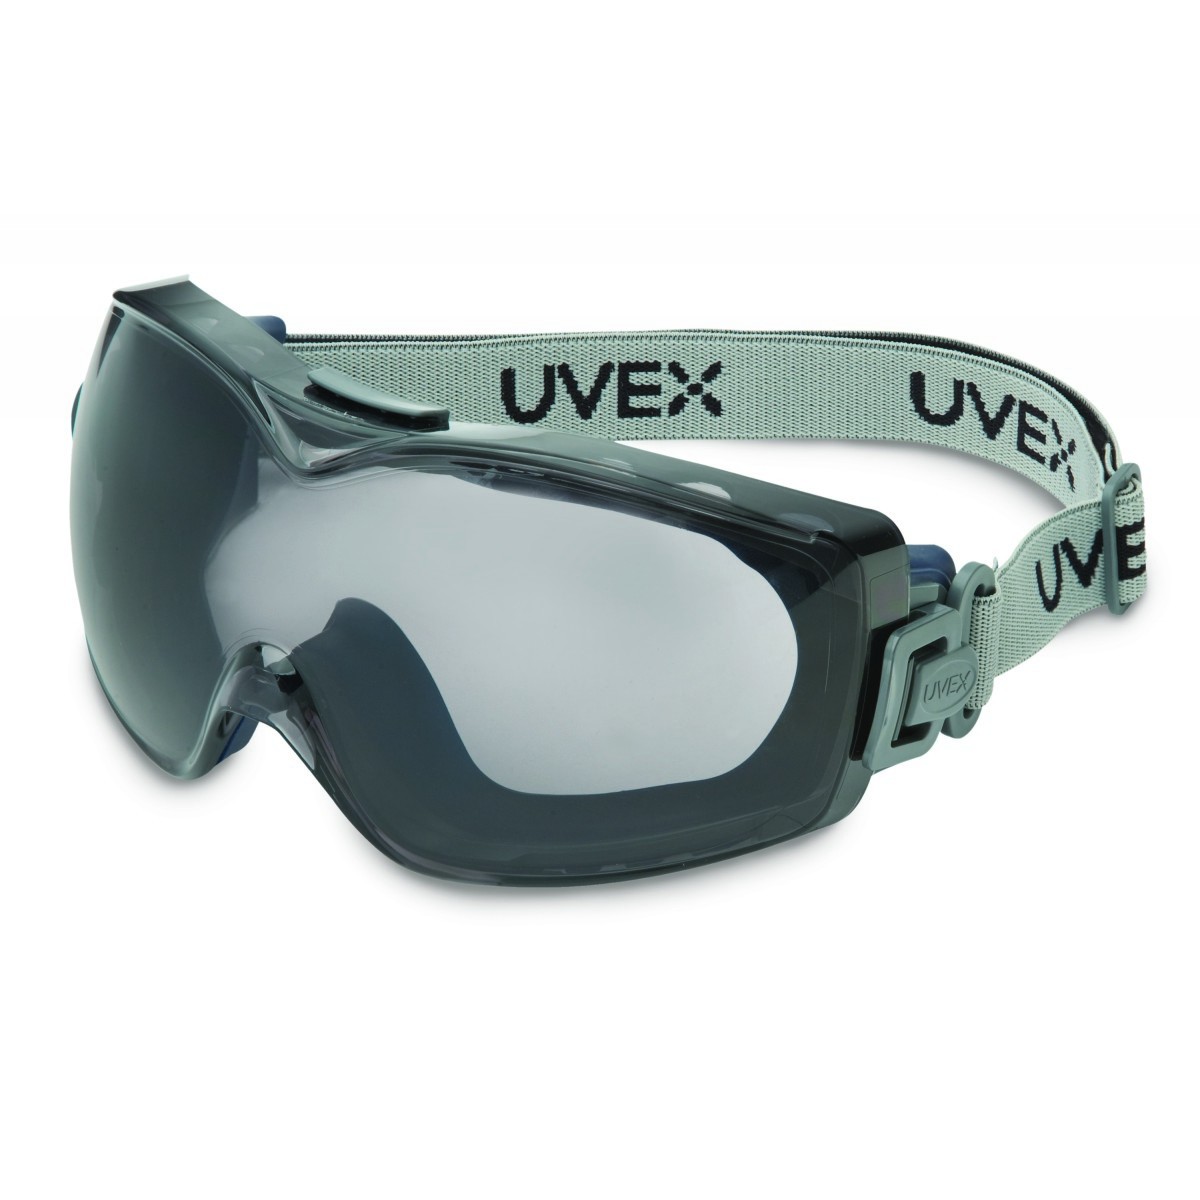 Honeywell Uvex Stealth® OTG Indirect Vent Chemical Splash Impact Over The Glasses Goggles With Blue Soft Frame And Gray HydroShi